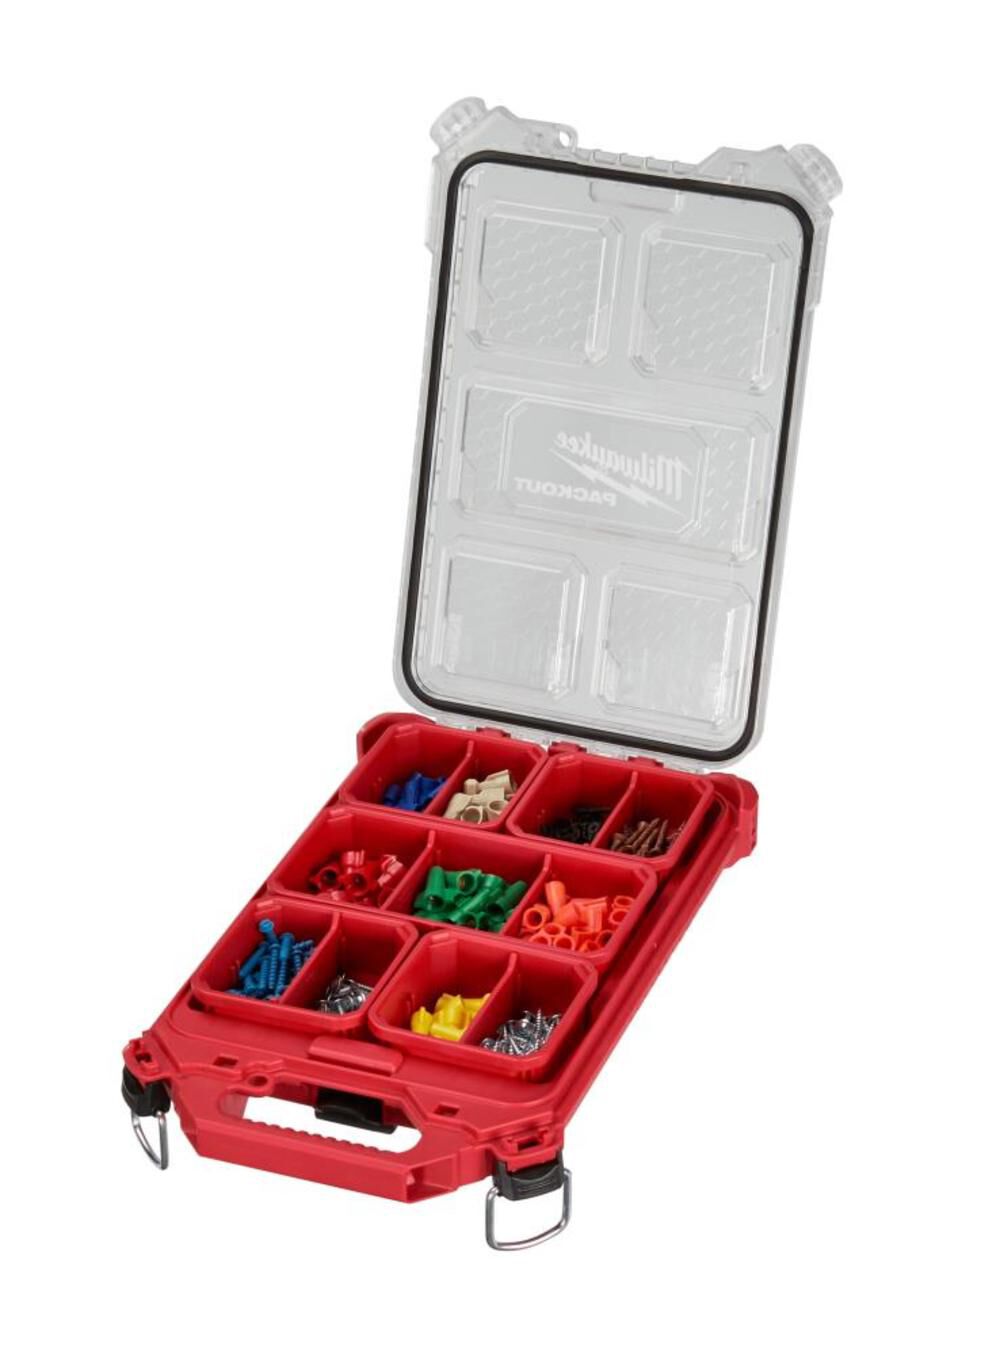 PACKOUT Compact Low-Profile Organizer 48-22-8436